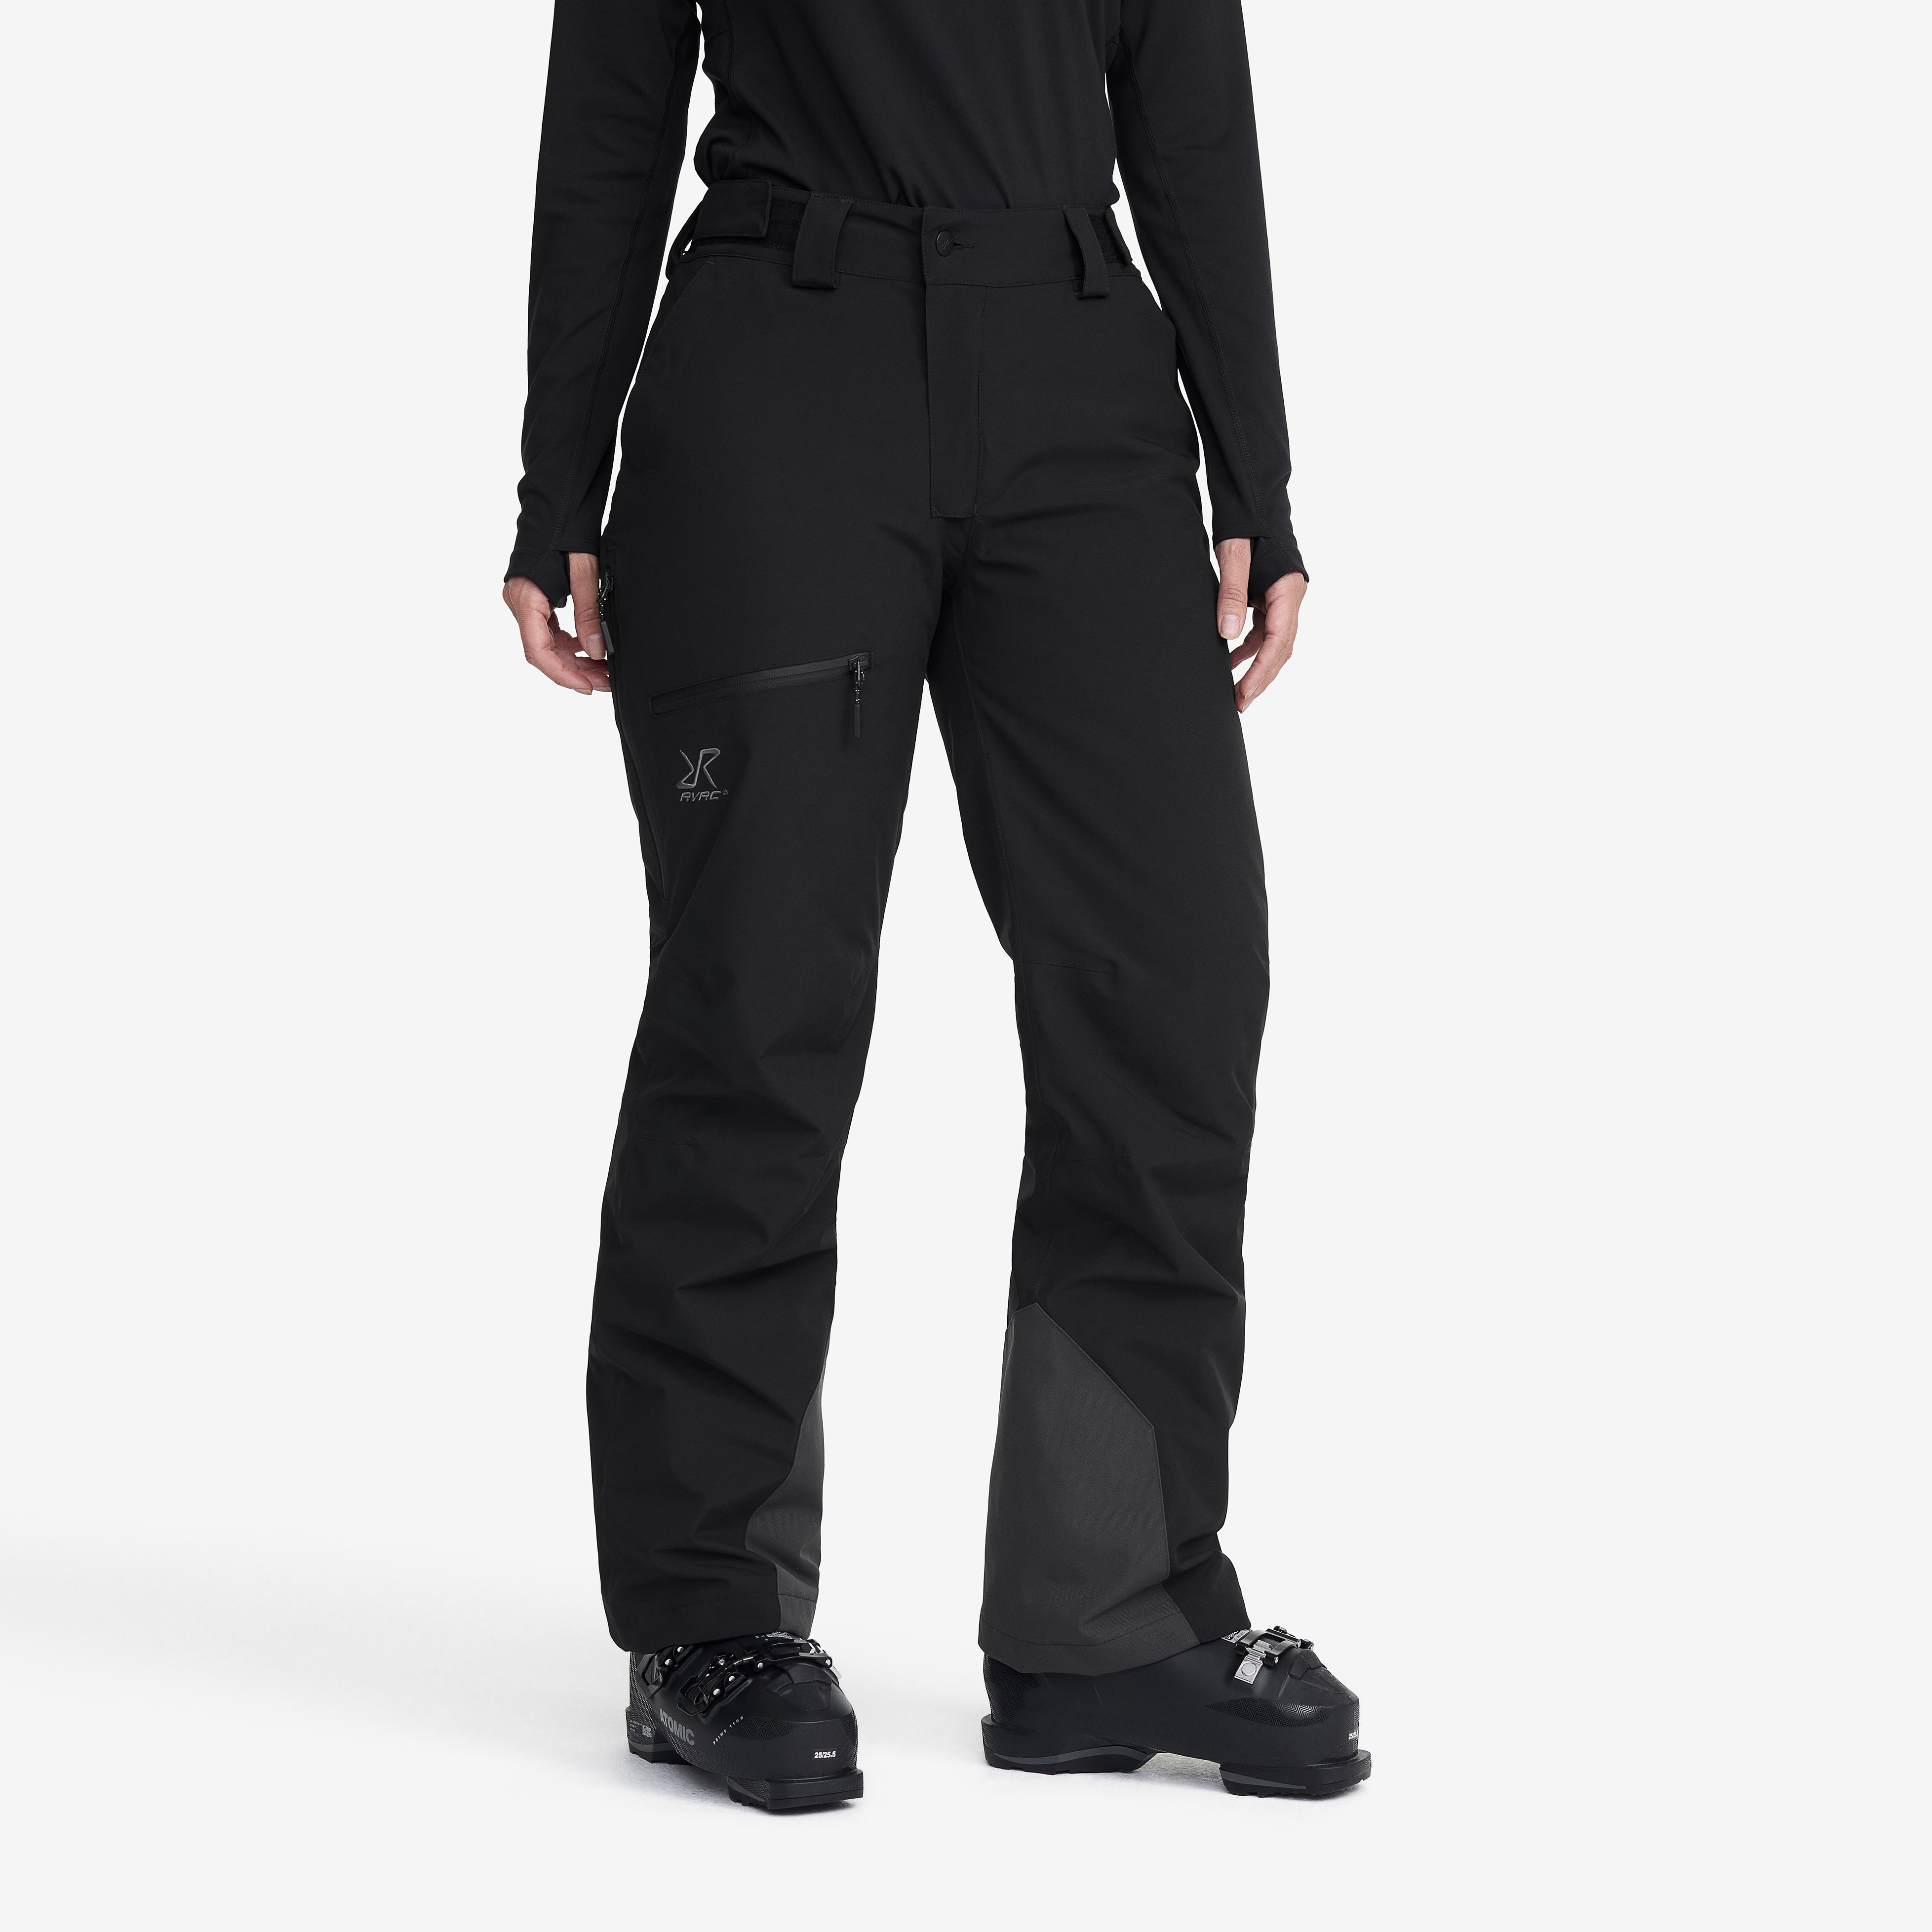 Halo 2L Insulated Snow Pants Black Naiset